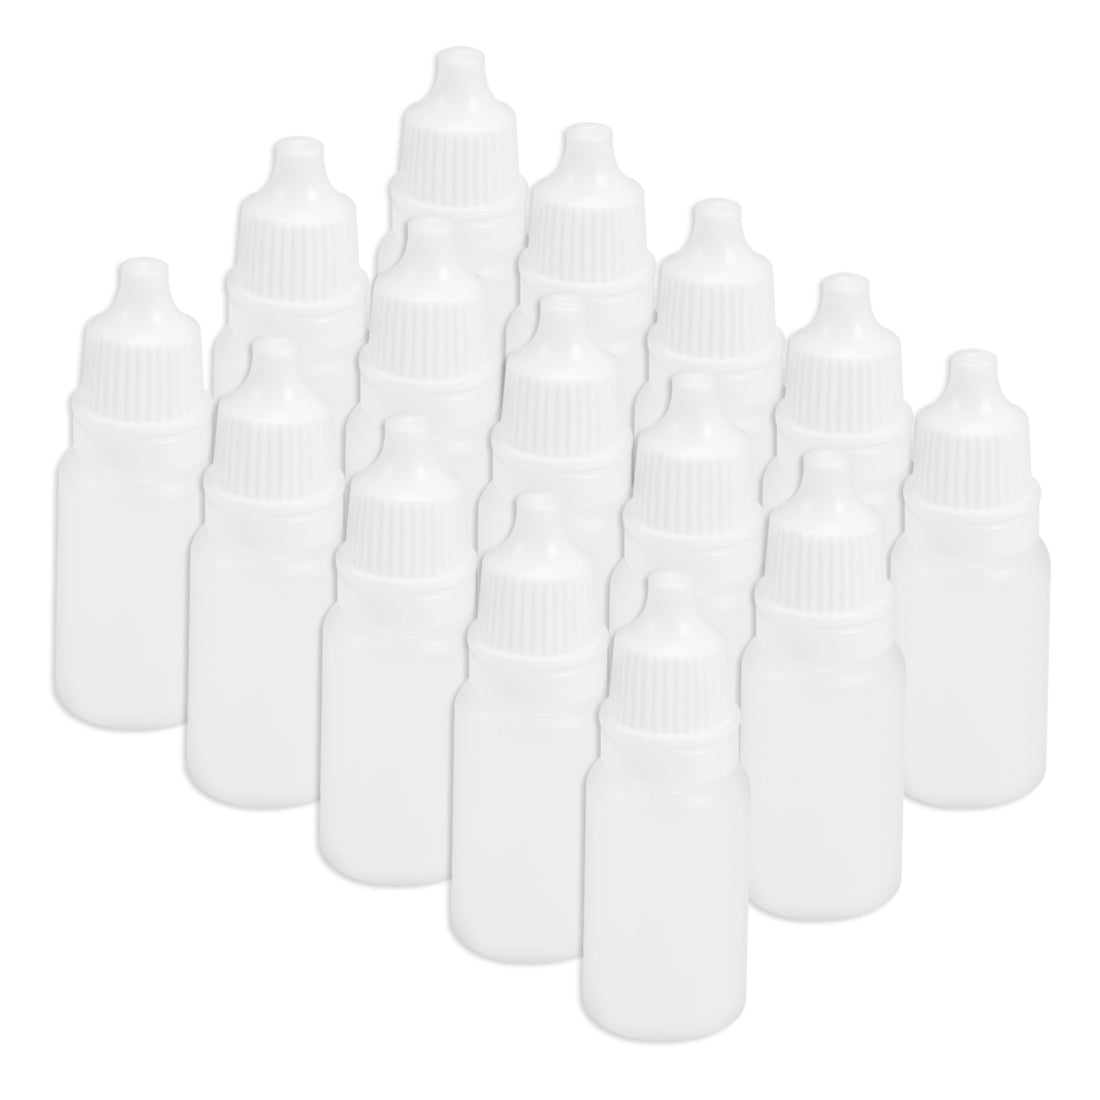 uxcell Uxcell 10ml/0.34 oz Empty Squeezable Dropper Bottle 15pcs